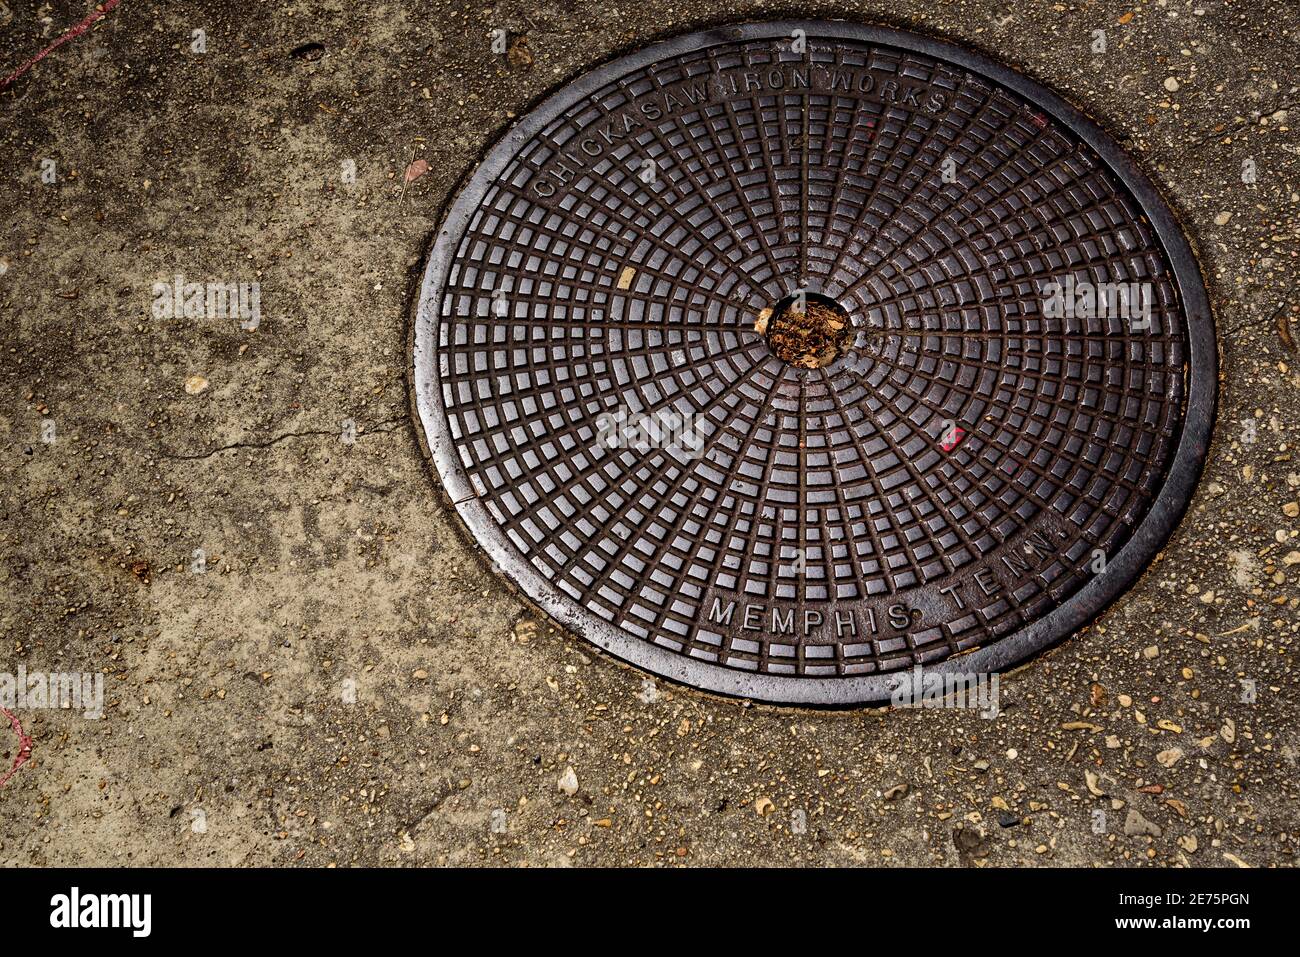 Manhole Cover with Memphis Engraved Stock Photo